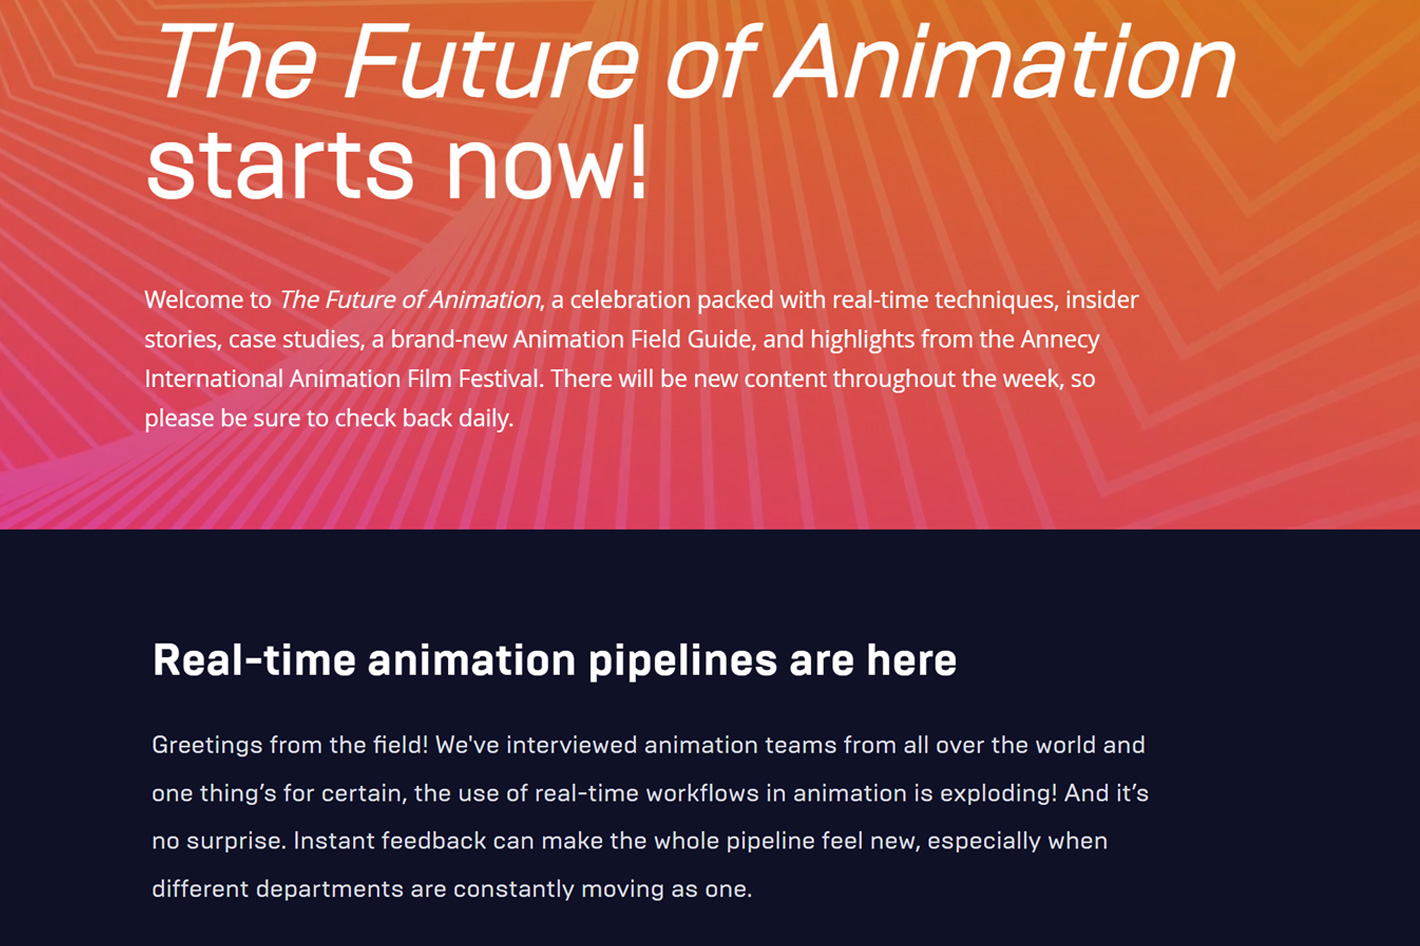 Animation Week: participate and get the Animation Field Guide by Jose  Antunes - ProVideo Coalition